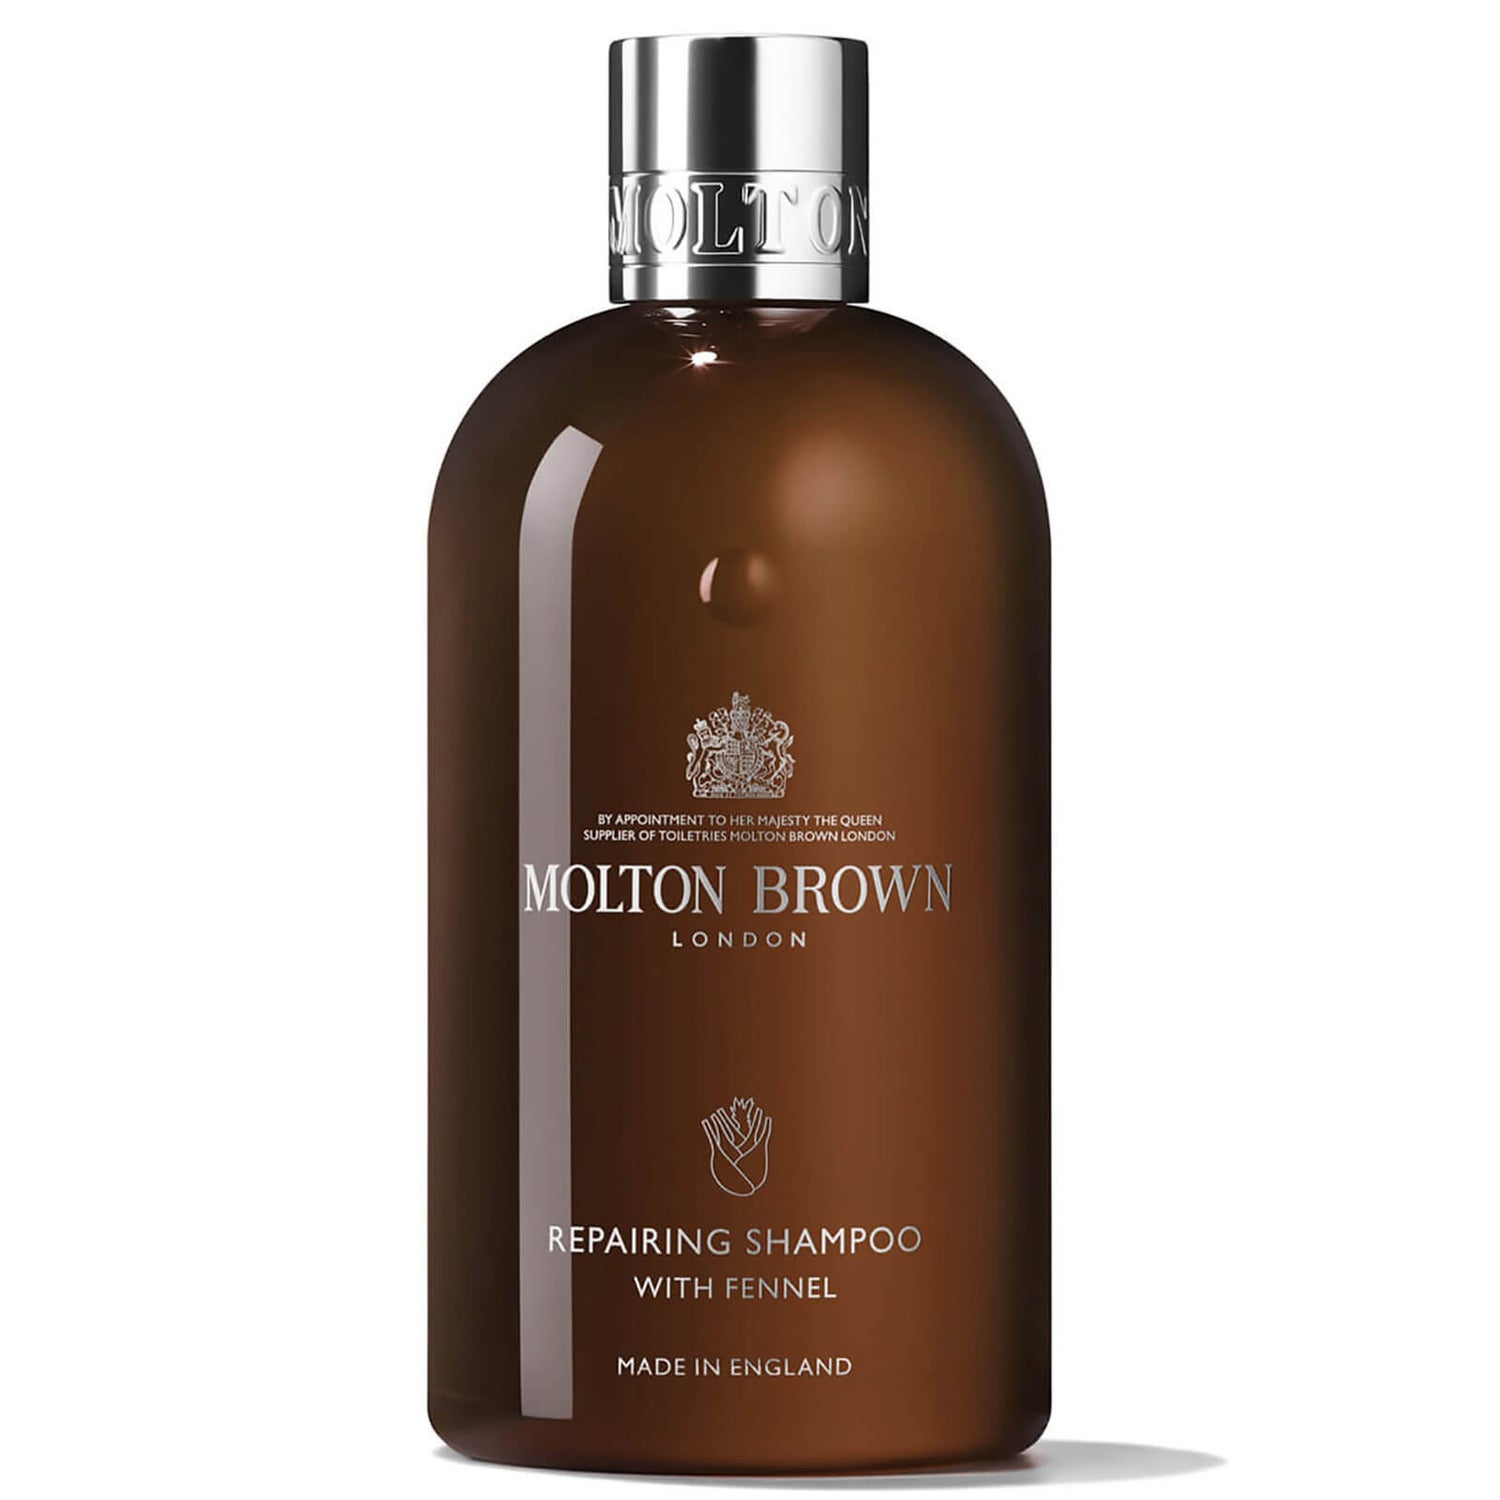 Molton Brown Repairing Shampoo with Fennel 300ml